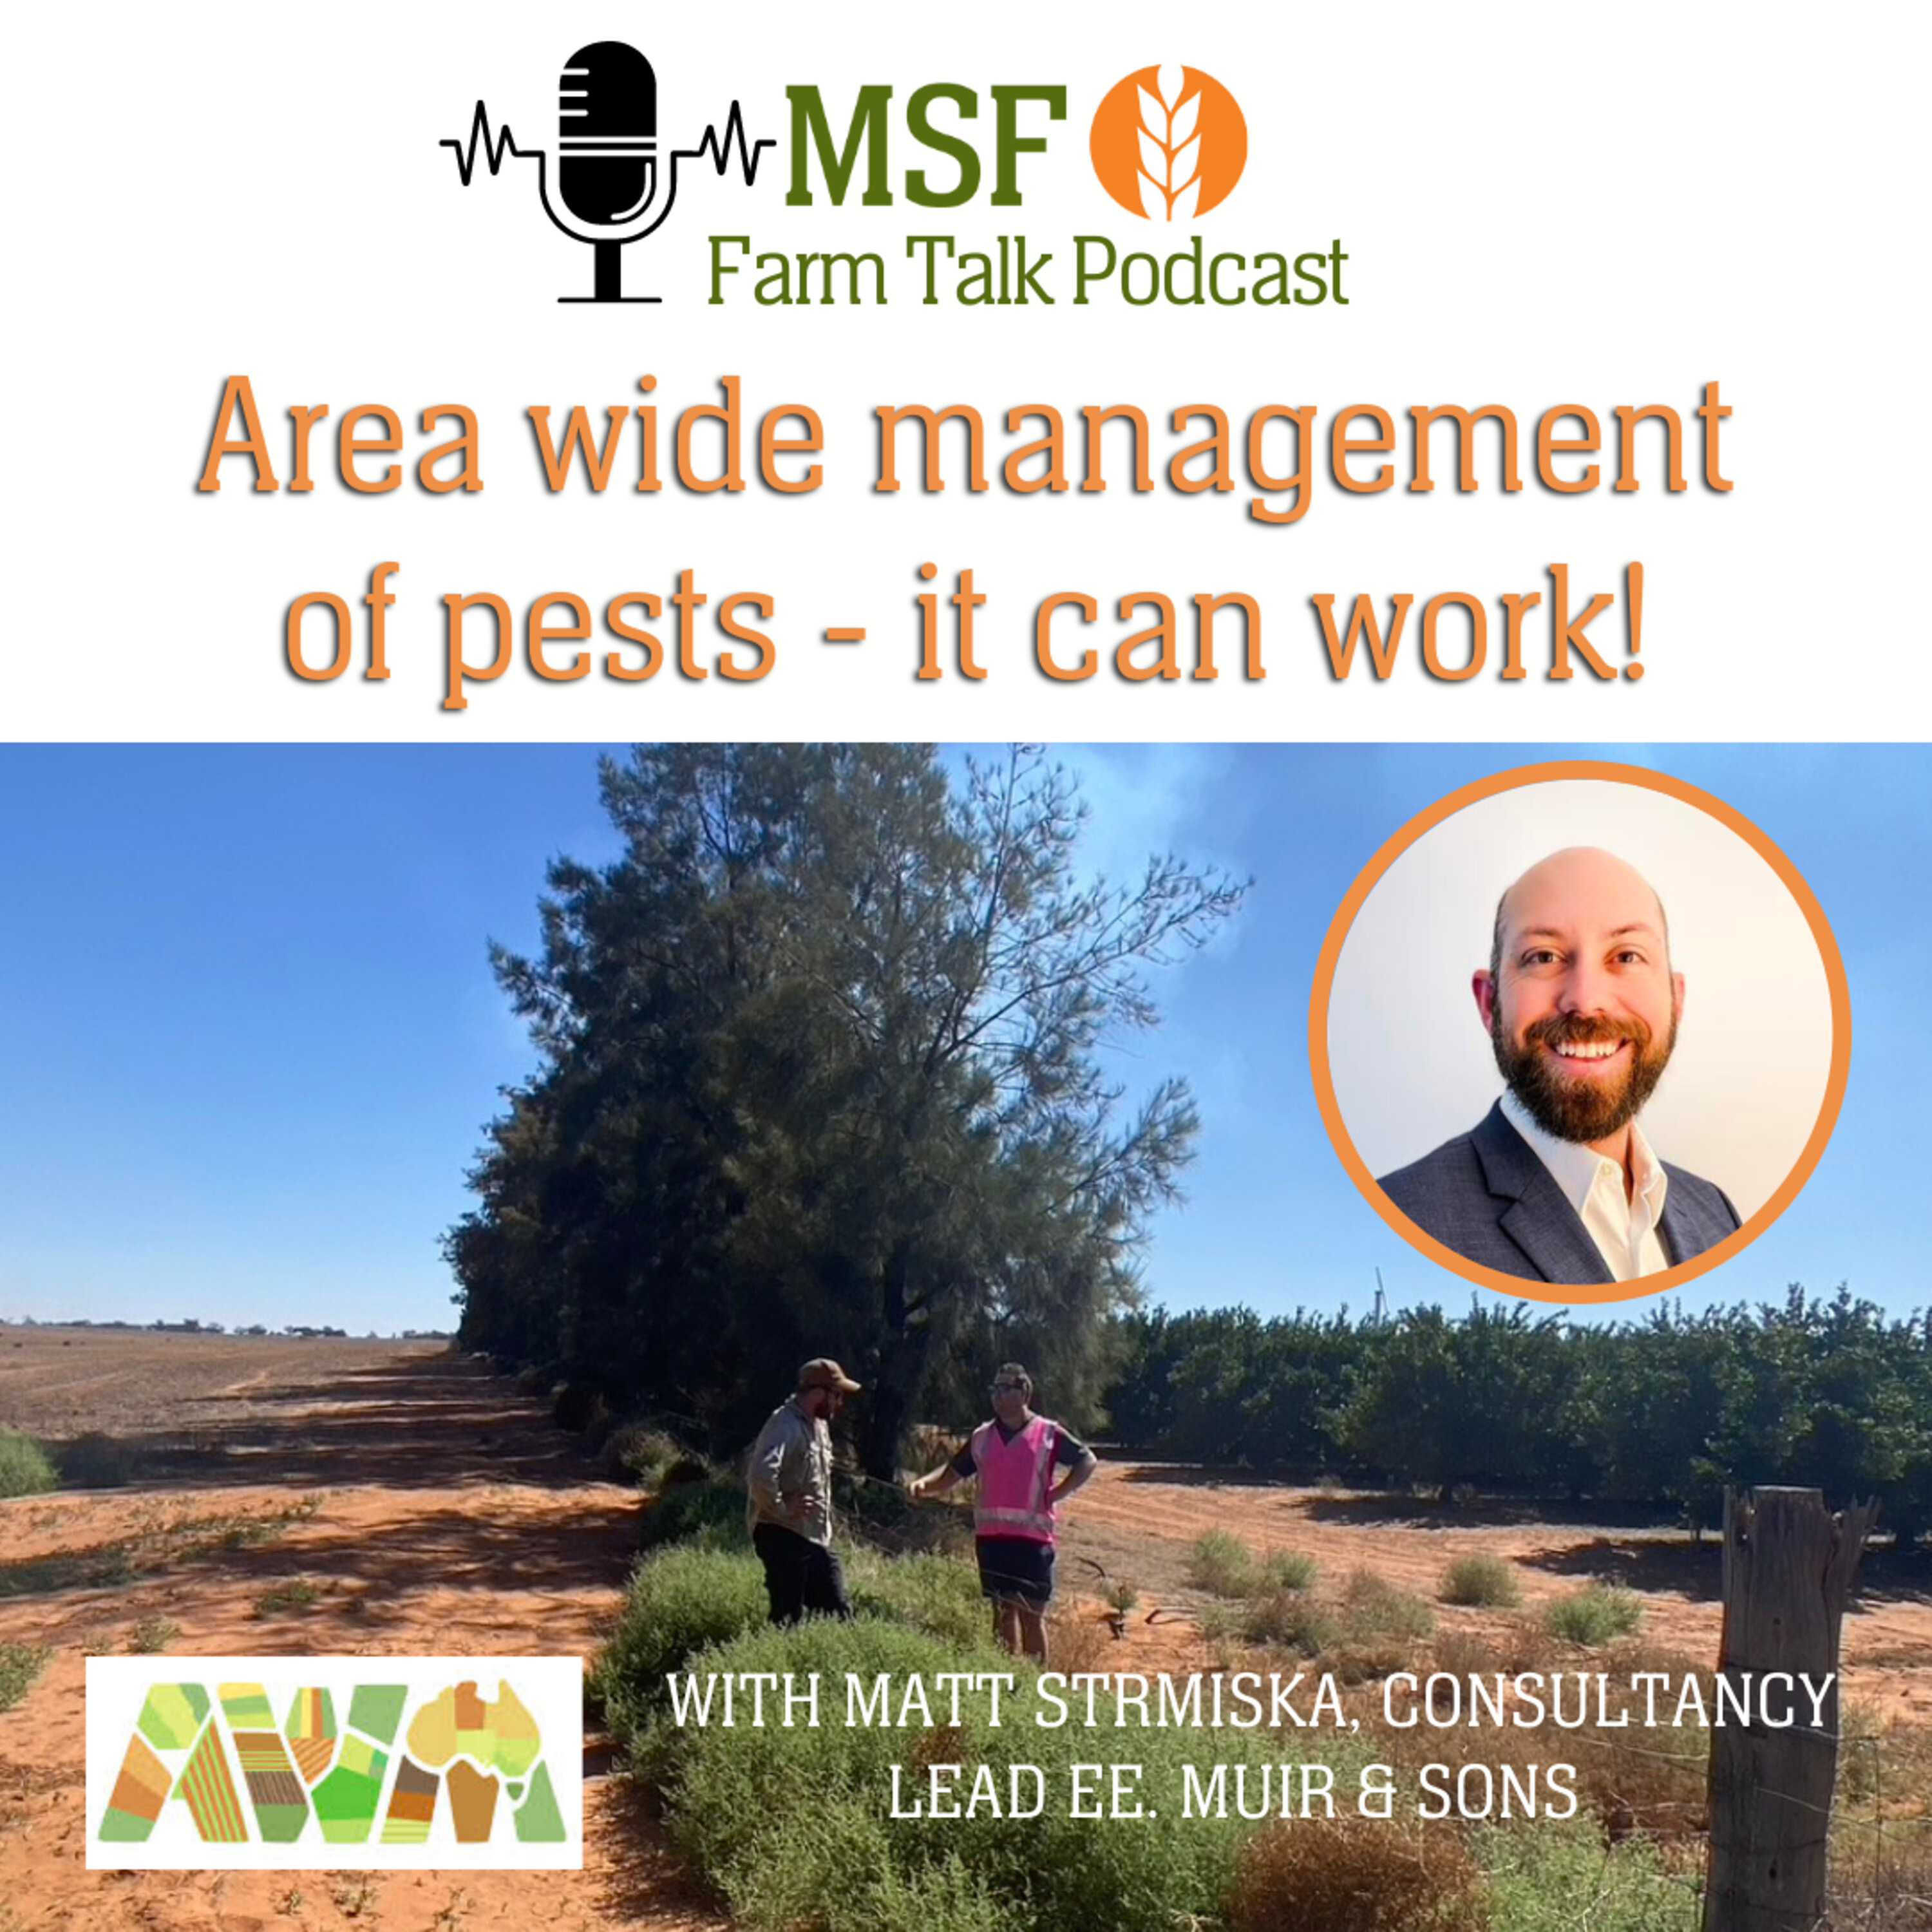 Area wide management of pests – it can work!